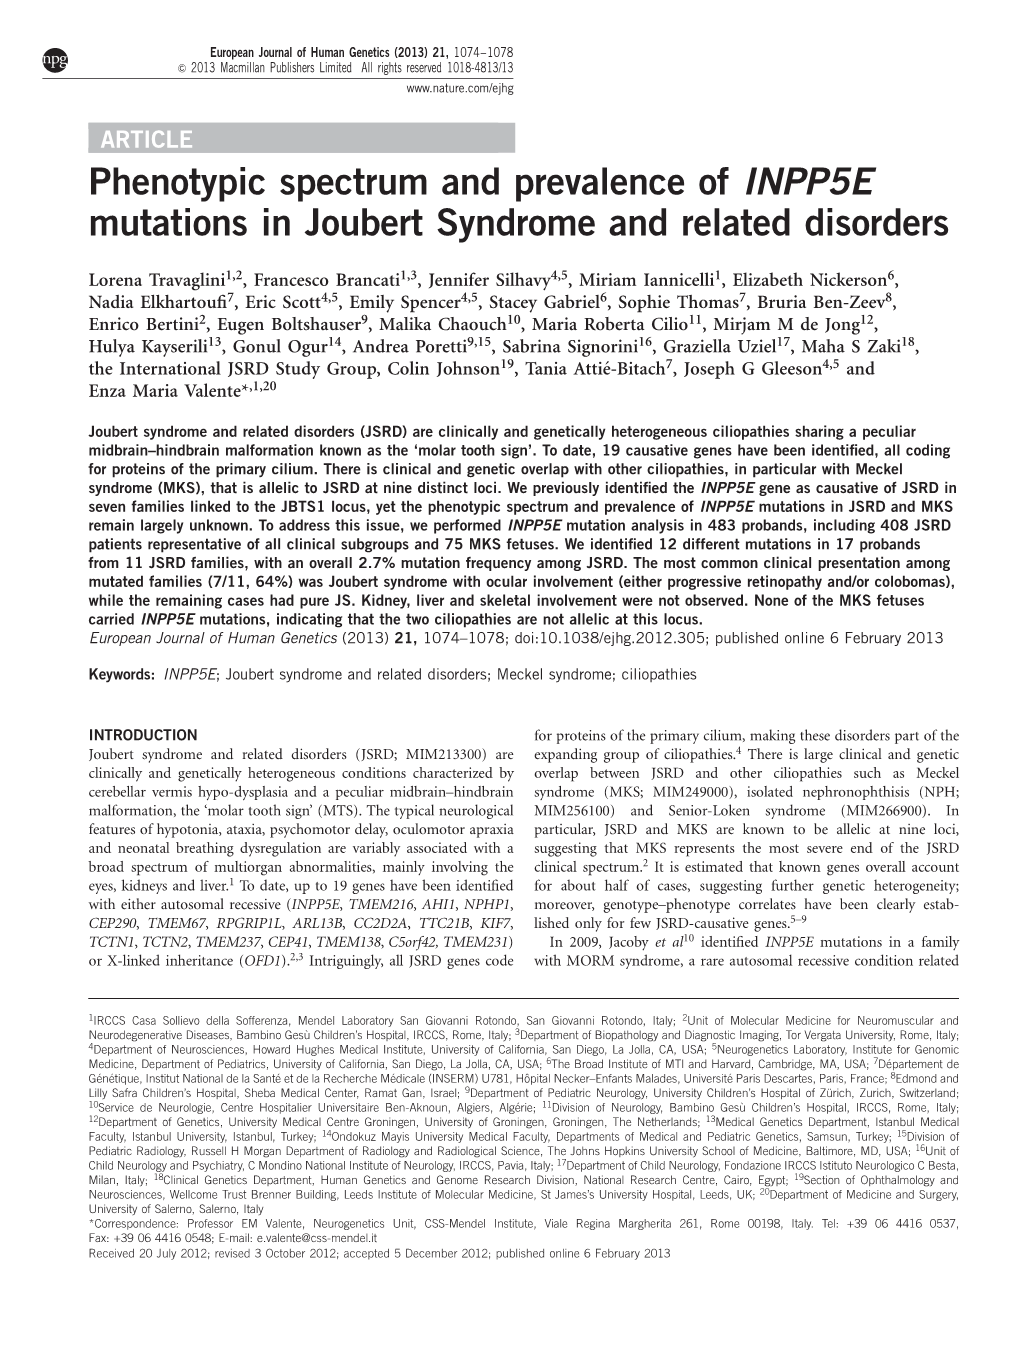 Phenotypic Spectrum and Prevalence of INPP5E Mutations in Joubert Syndrome and Related Disorders